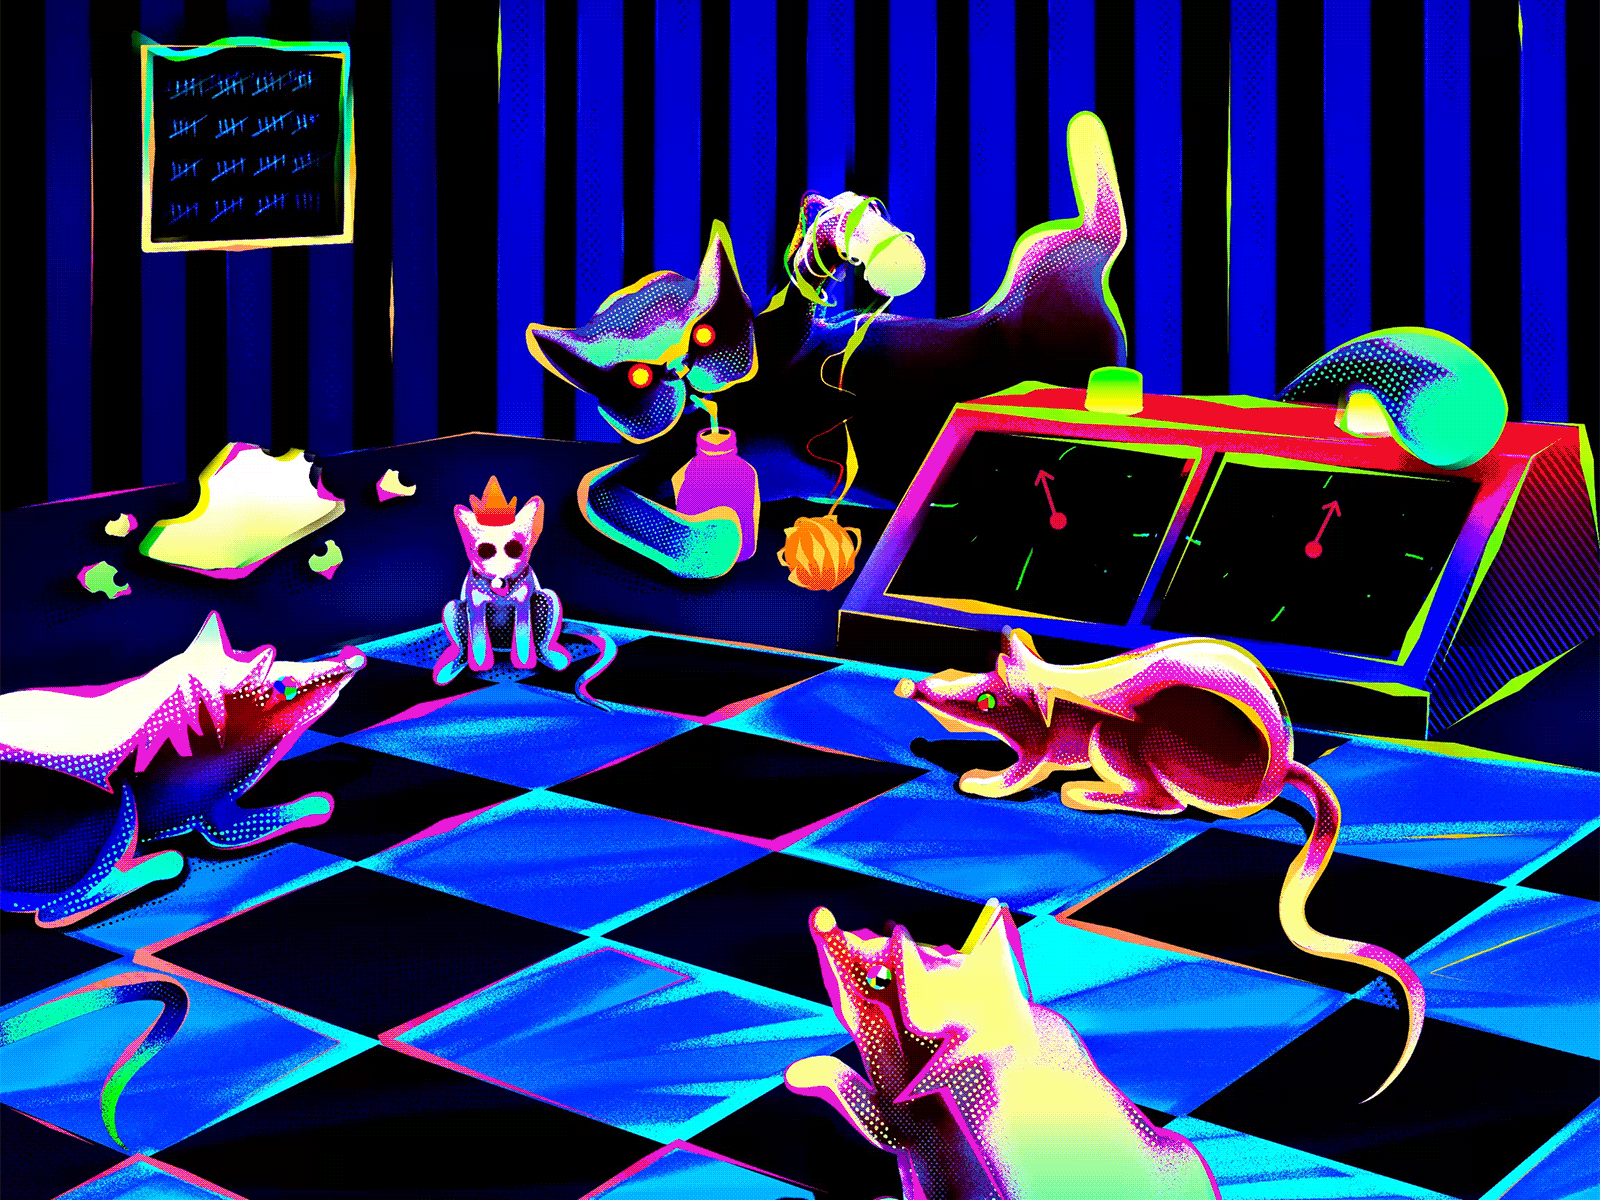 Checkmate animation cat checkmate chess colorful daliesque gif illustration loop rats surreal vivid